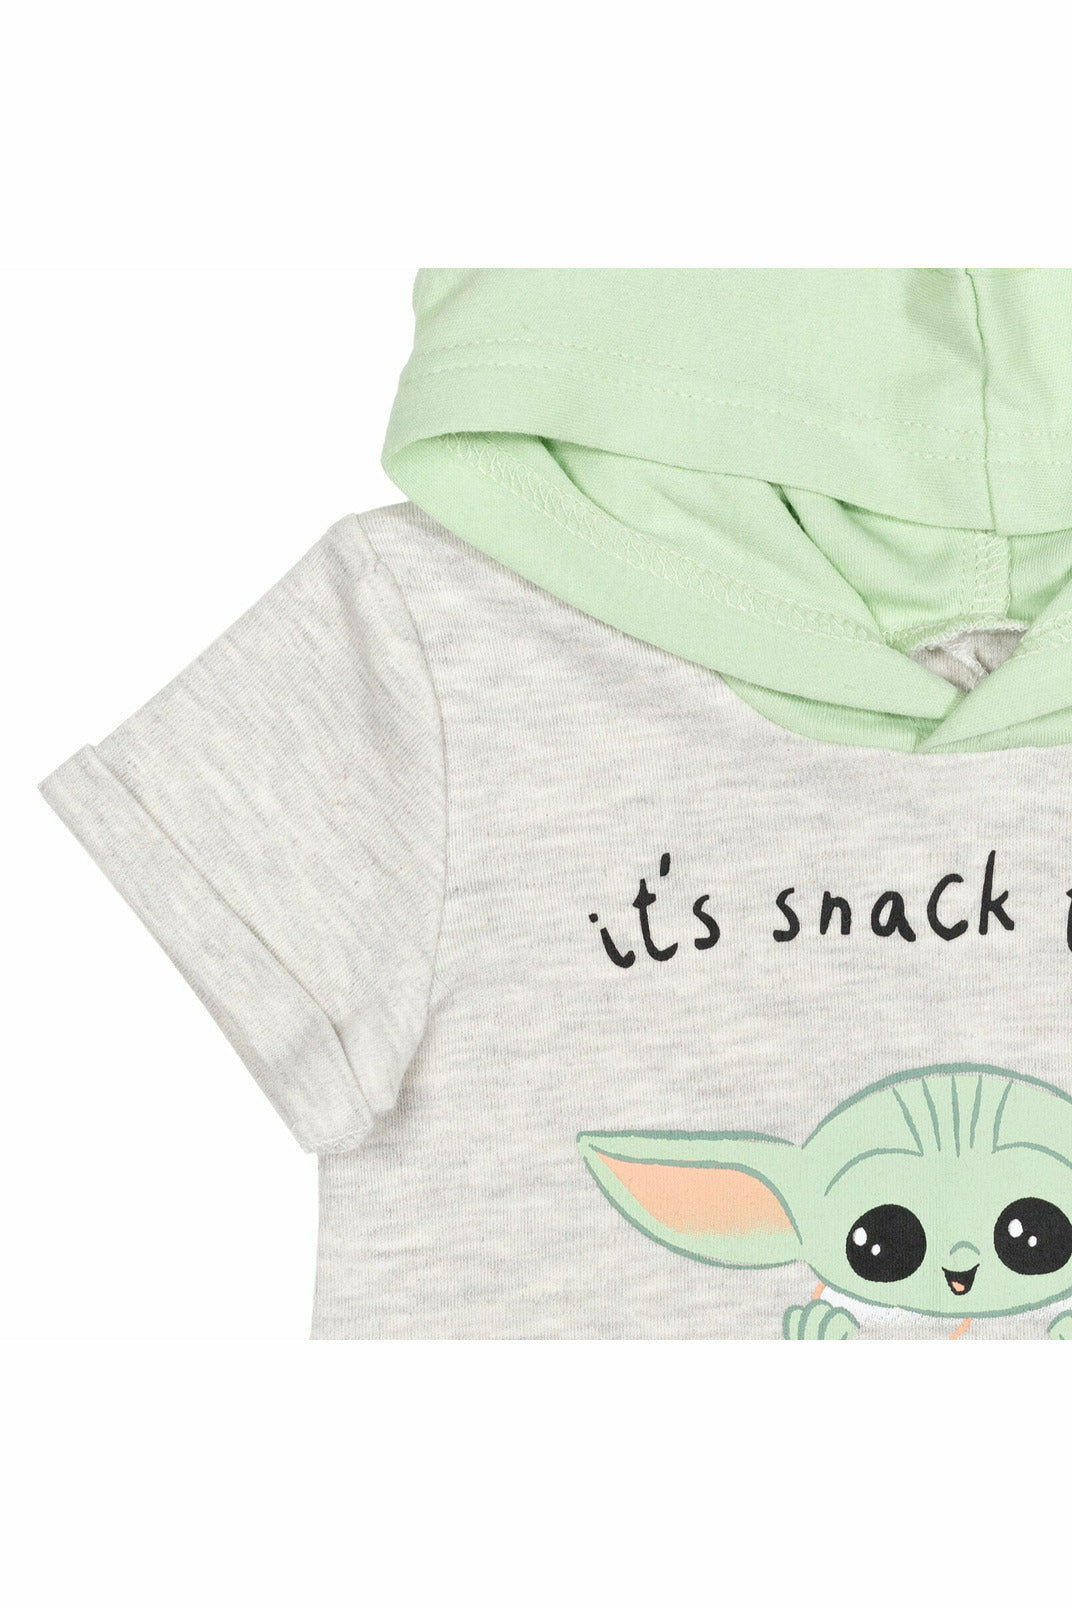 Baby Yoda Hooded Costume Short Sleeve Romper with Pocket